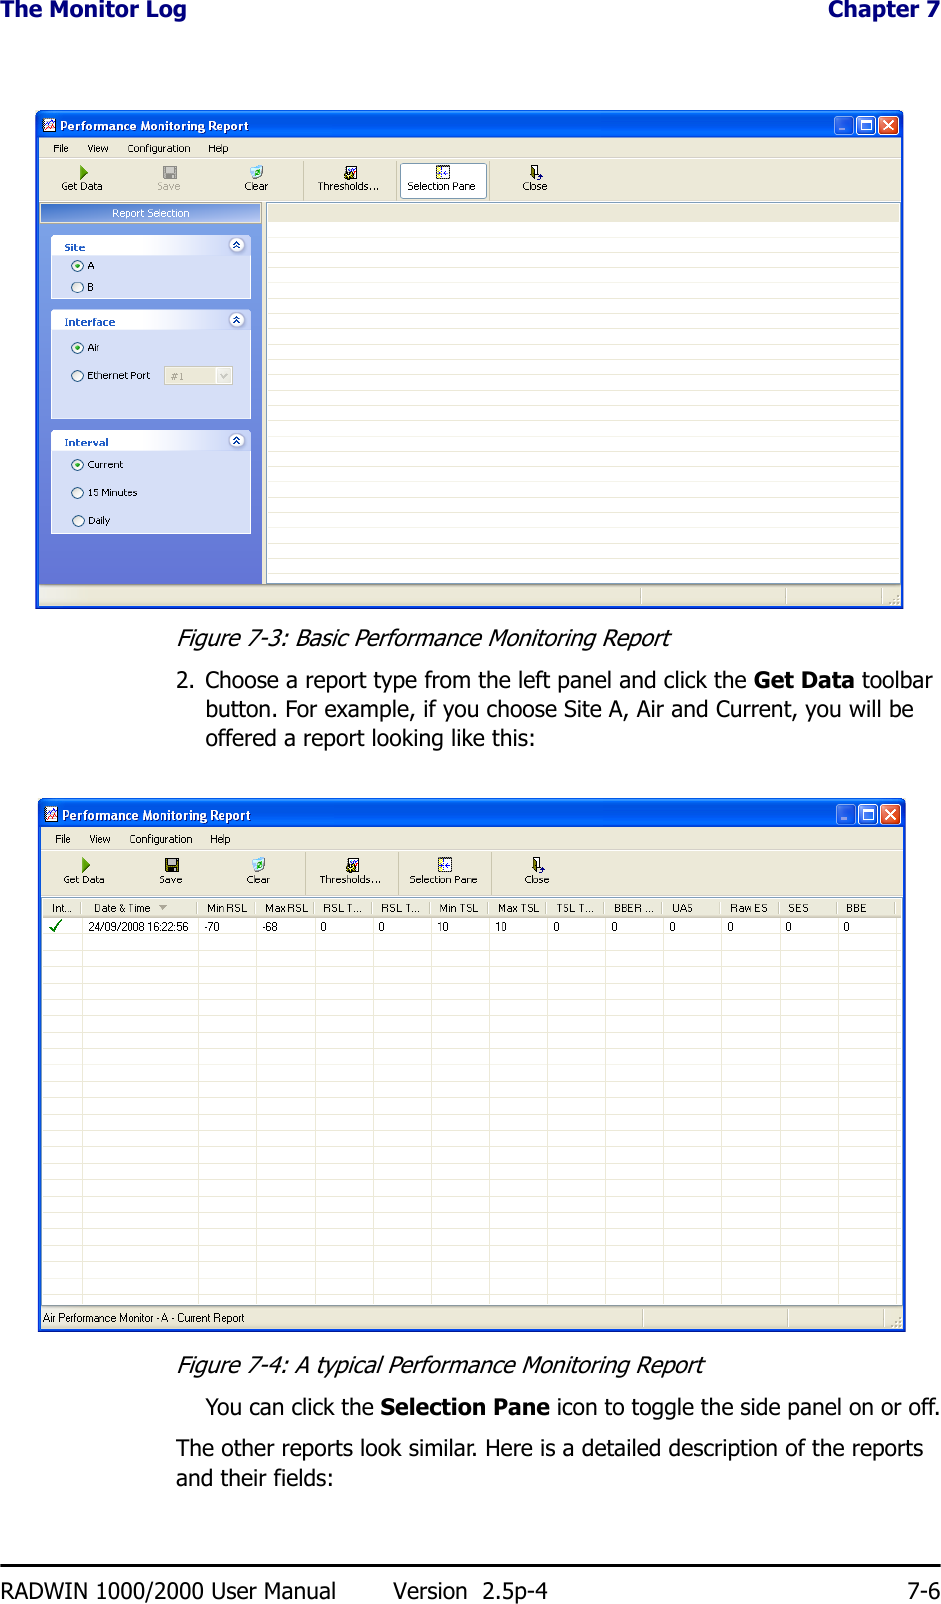 The Monitor Log  Chapter 7RADWIN 1000/2000 User Manual Version  2.5p-4 7-6Figure 7-3: Basic Performance Monitoring Report2. Choose a report type from the left panel and click the Get Data toolbar button. For example, if you choose Site A, Air and Current, you will be offered a report looking like this:Figure 7-4: A typical Performance Monitoring ReportYou can click the Selection Pane icon to toggle the side panel on or off.The other reports look similar. Here is a detailed description of the reports and their fields: